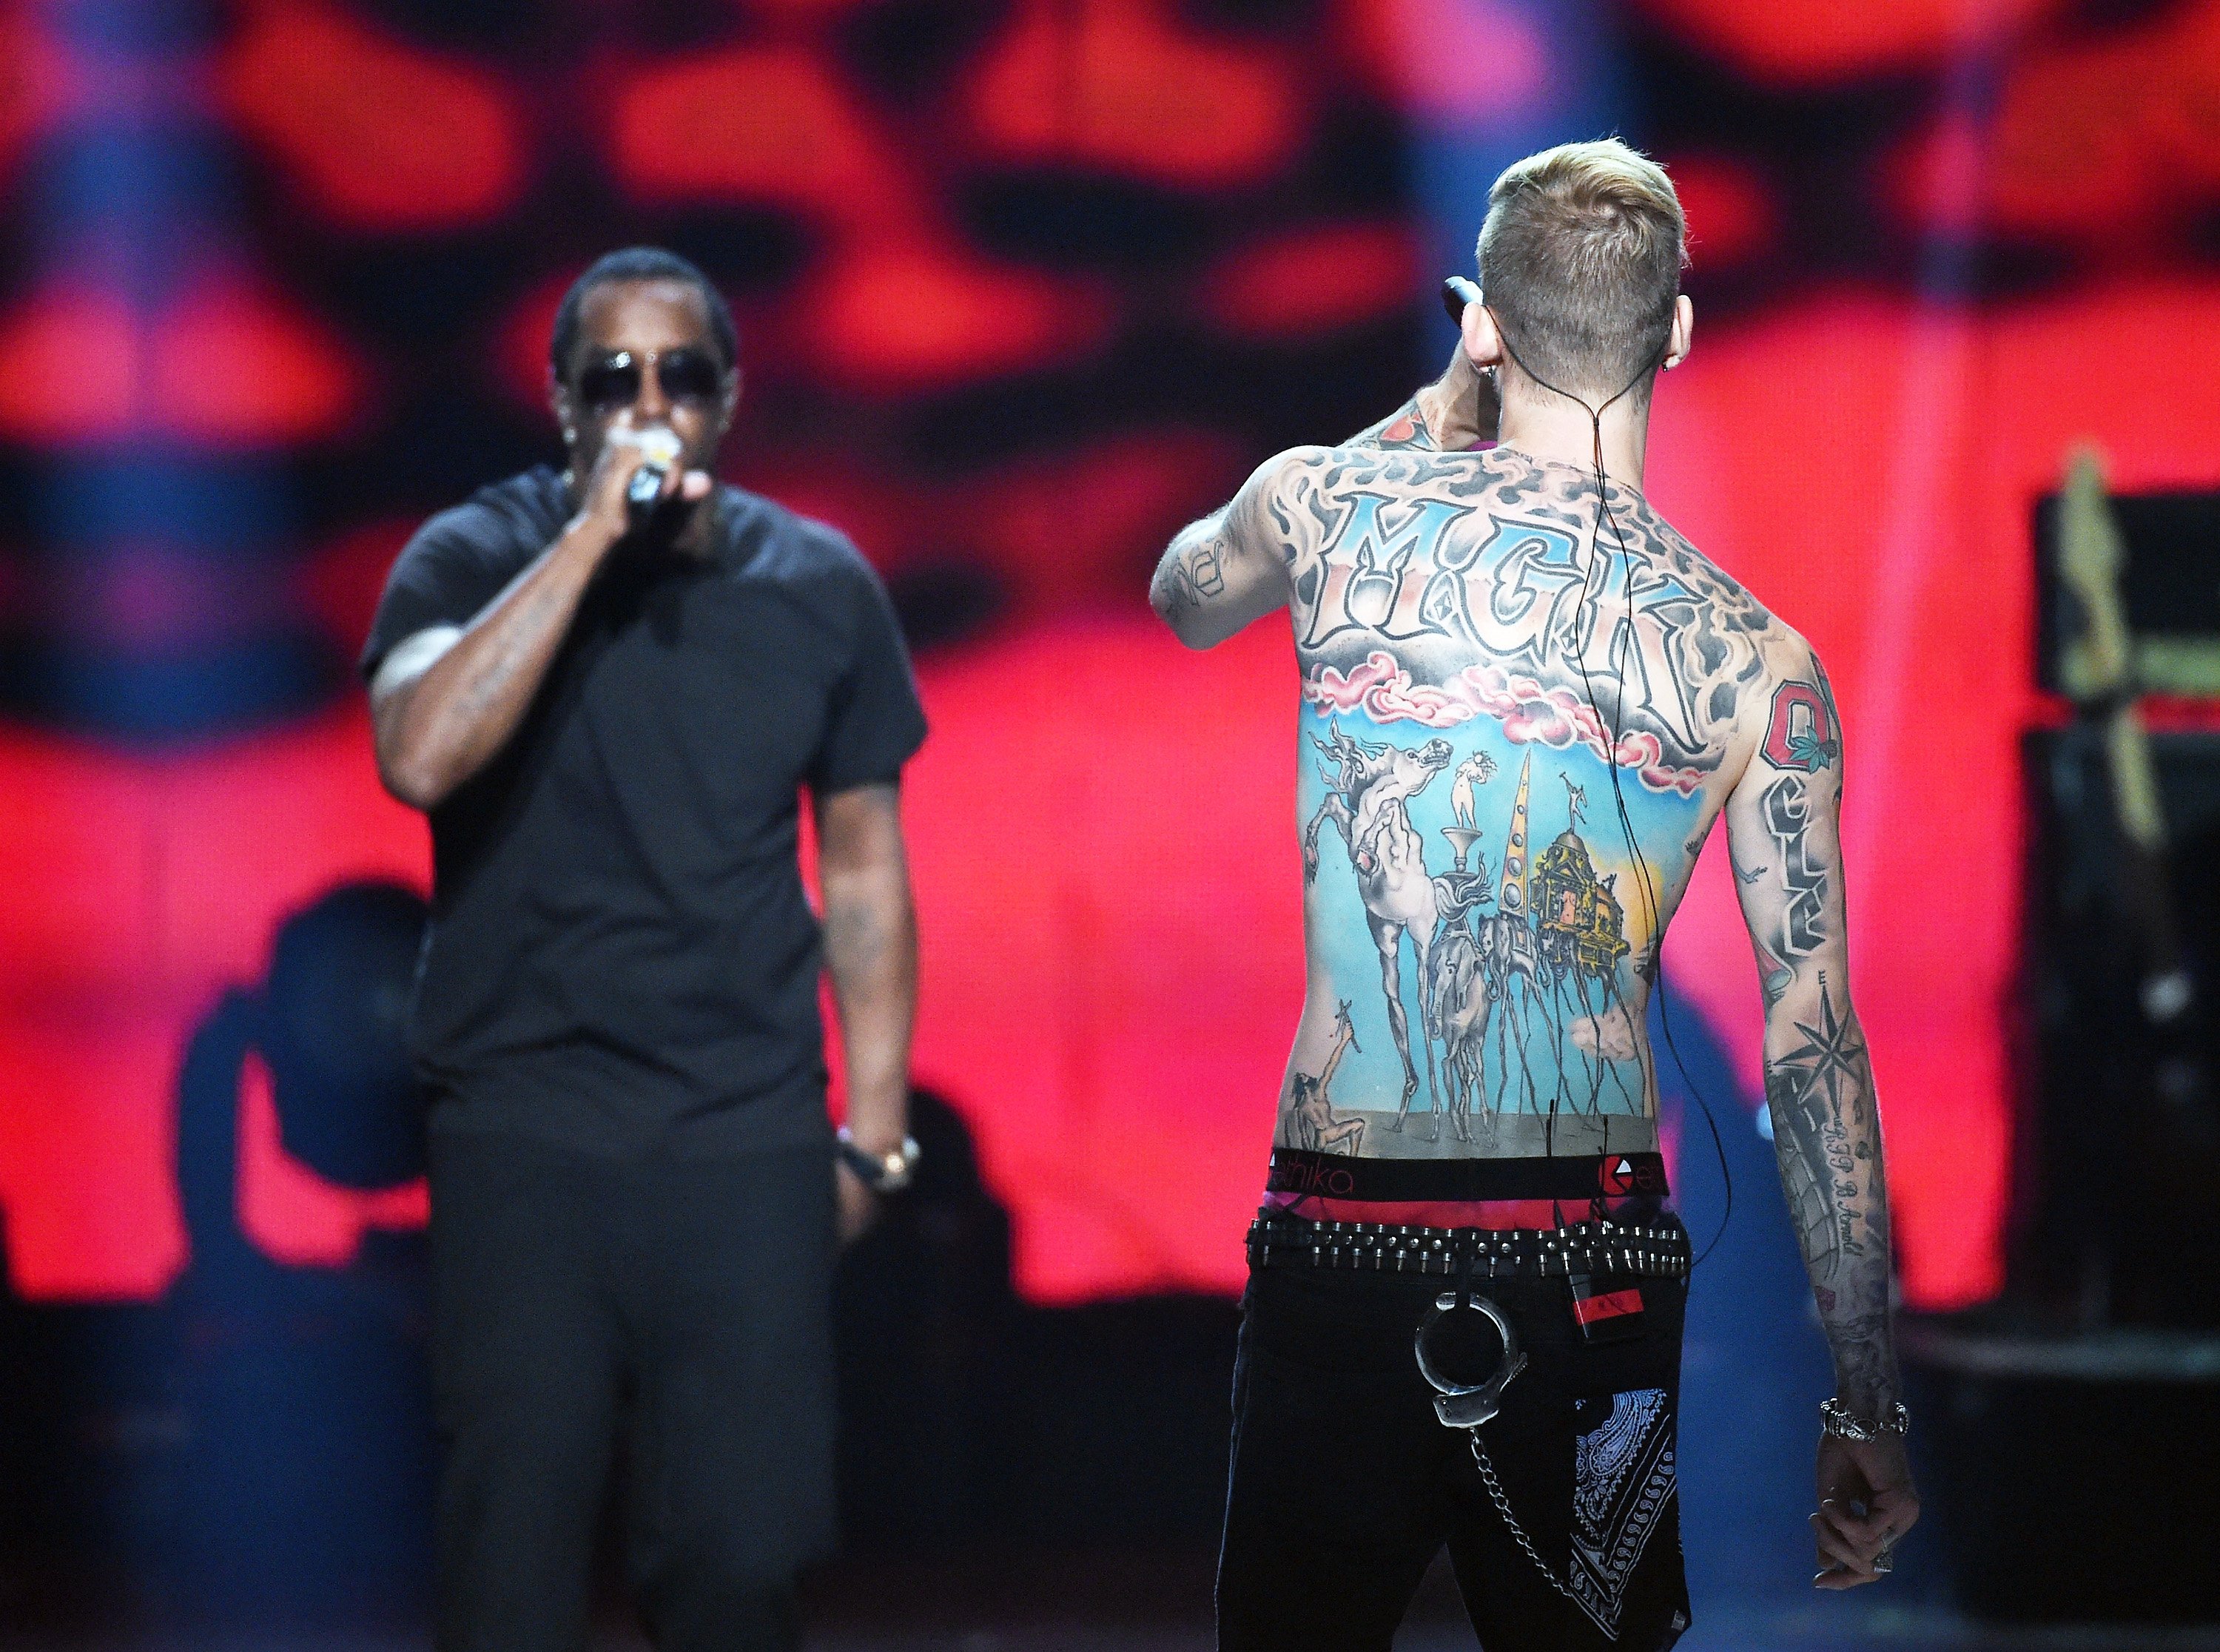 Machine Gun Kelly's back tattoo faces the camera as he performs with Sean "Diddy" Combs.